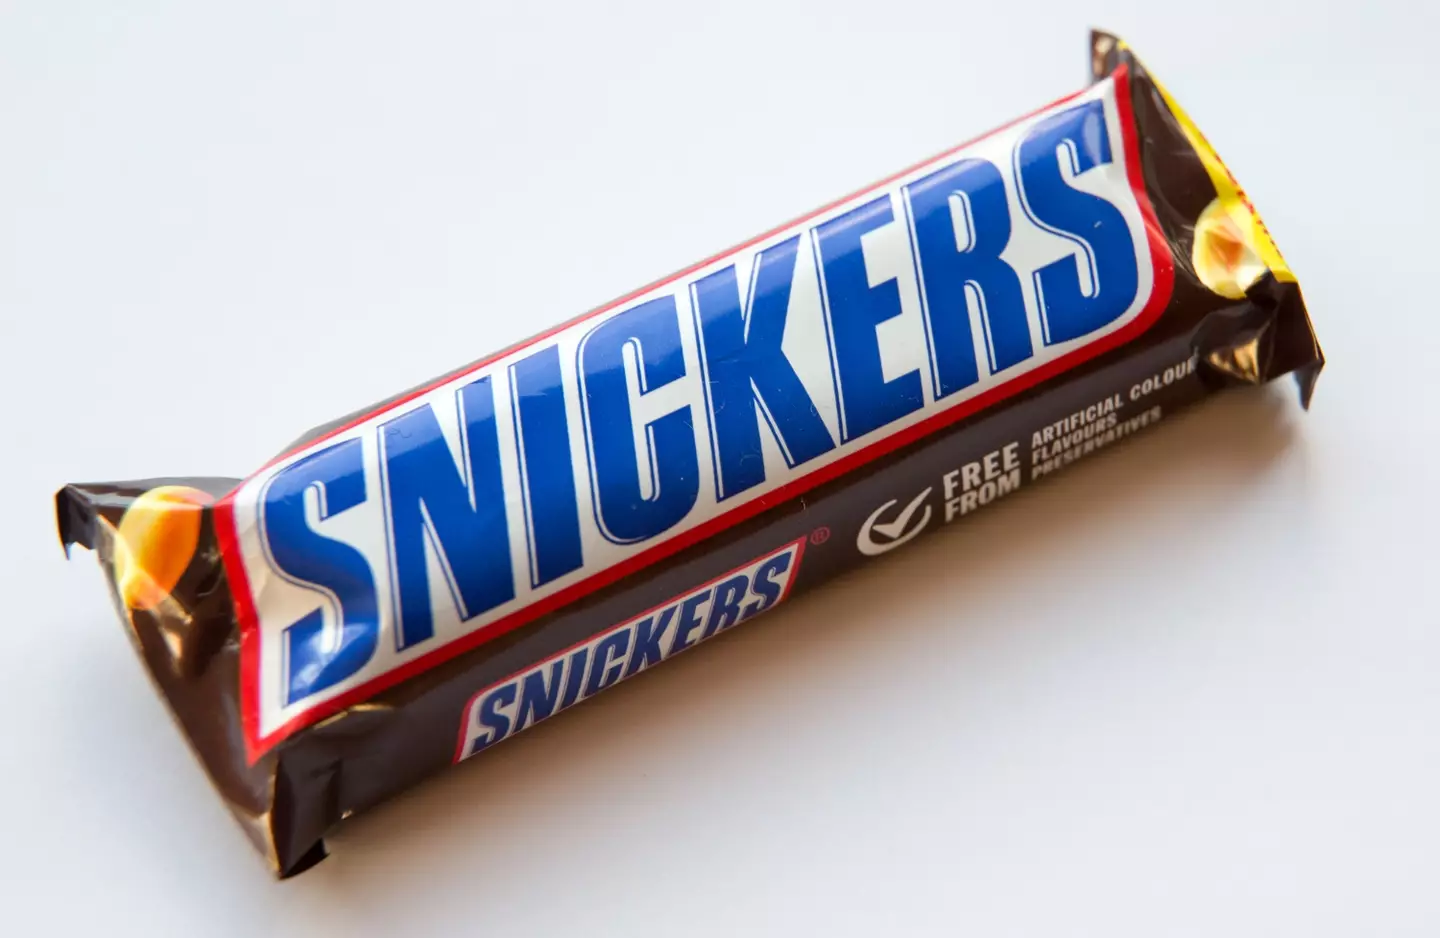 People are only just finding out how Snickers got its name.